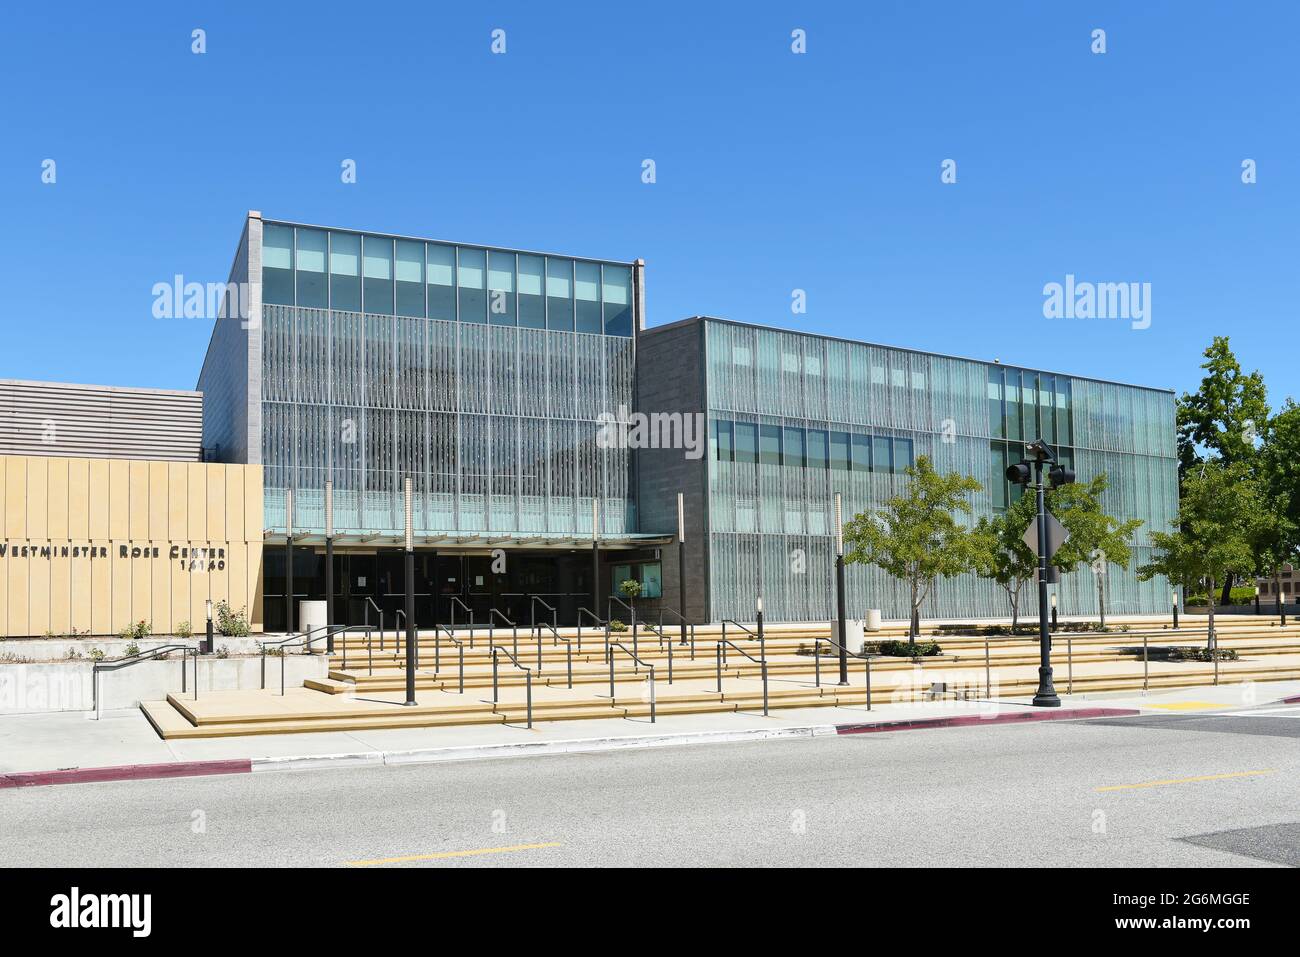 WESTMINSTER, CALIFORNIA - 5 JULY 2021: The Westminster Rose Center complex that includes multiple ballrooms and banquet facilities, including a Perfor Stock Photo